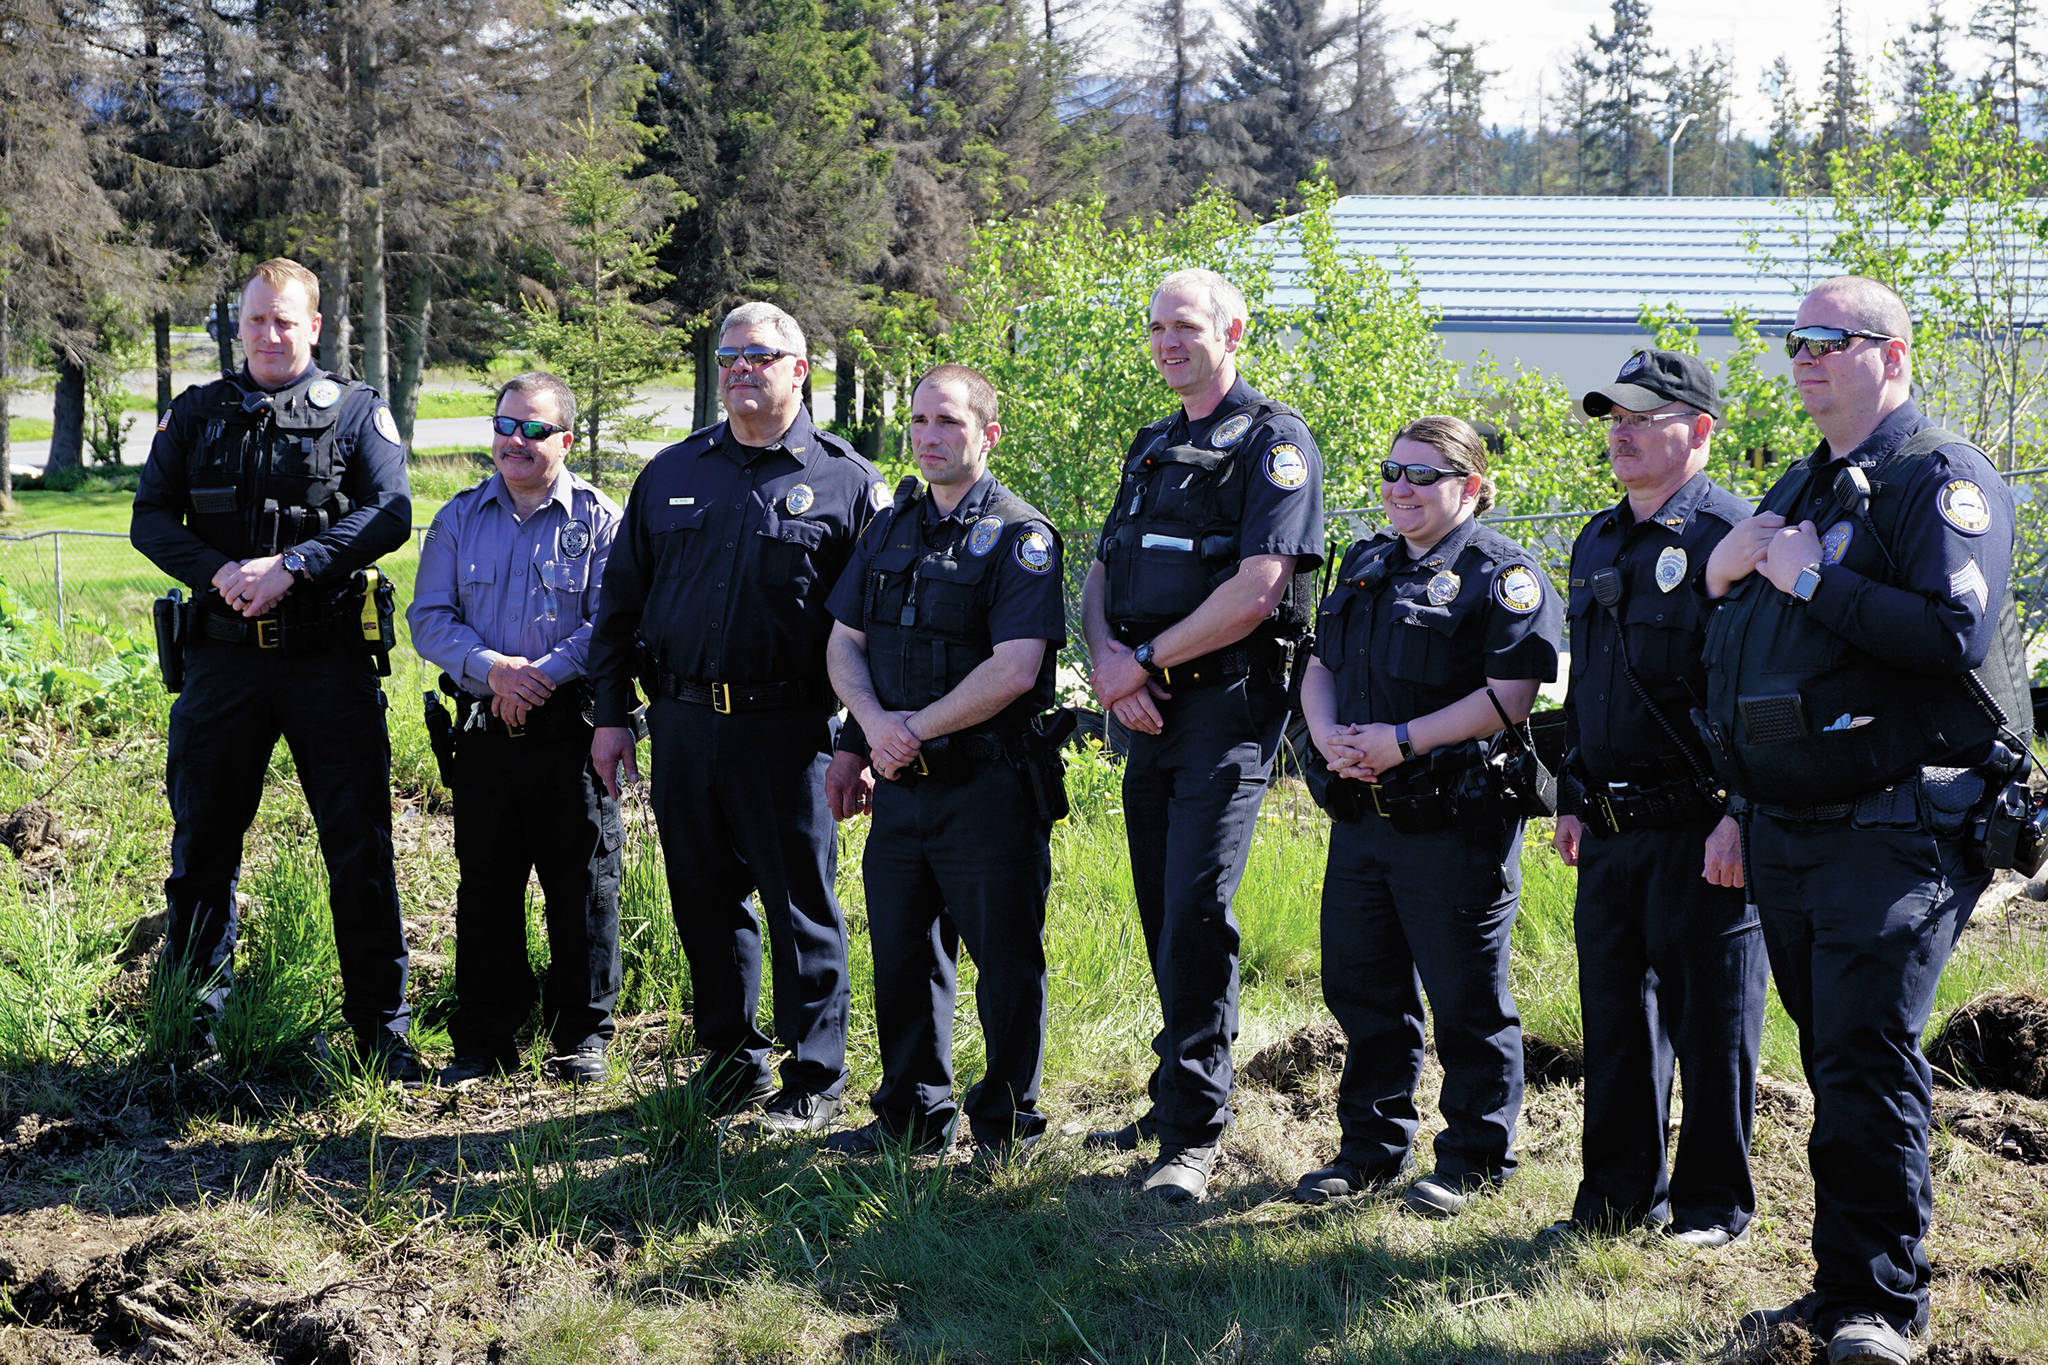 Homer Police Chief Mark Robl, third from left, stands with some of the Homer Police Department officers and jail officers at groundbreaking ceremonies on May 24, 2019, for the new police station in Homer, Alaska. (Photo by Michael Armstrong/Homer News)